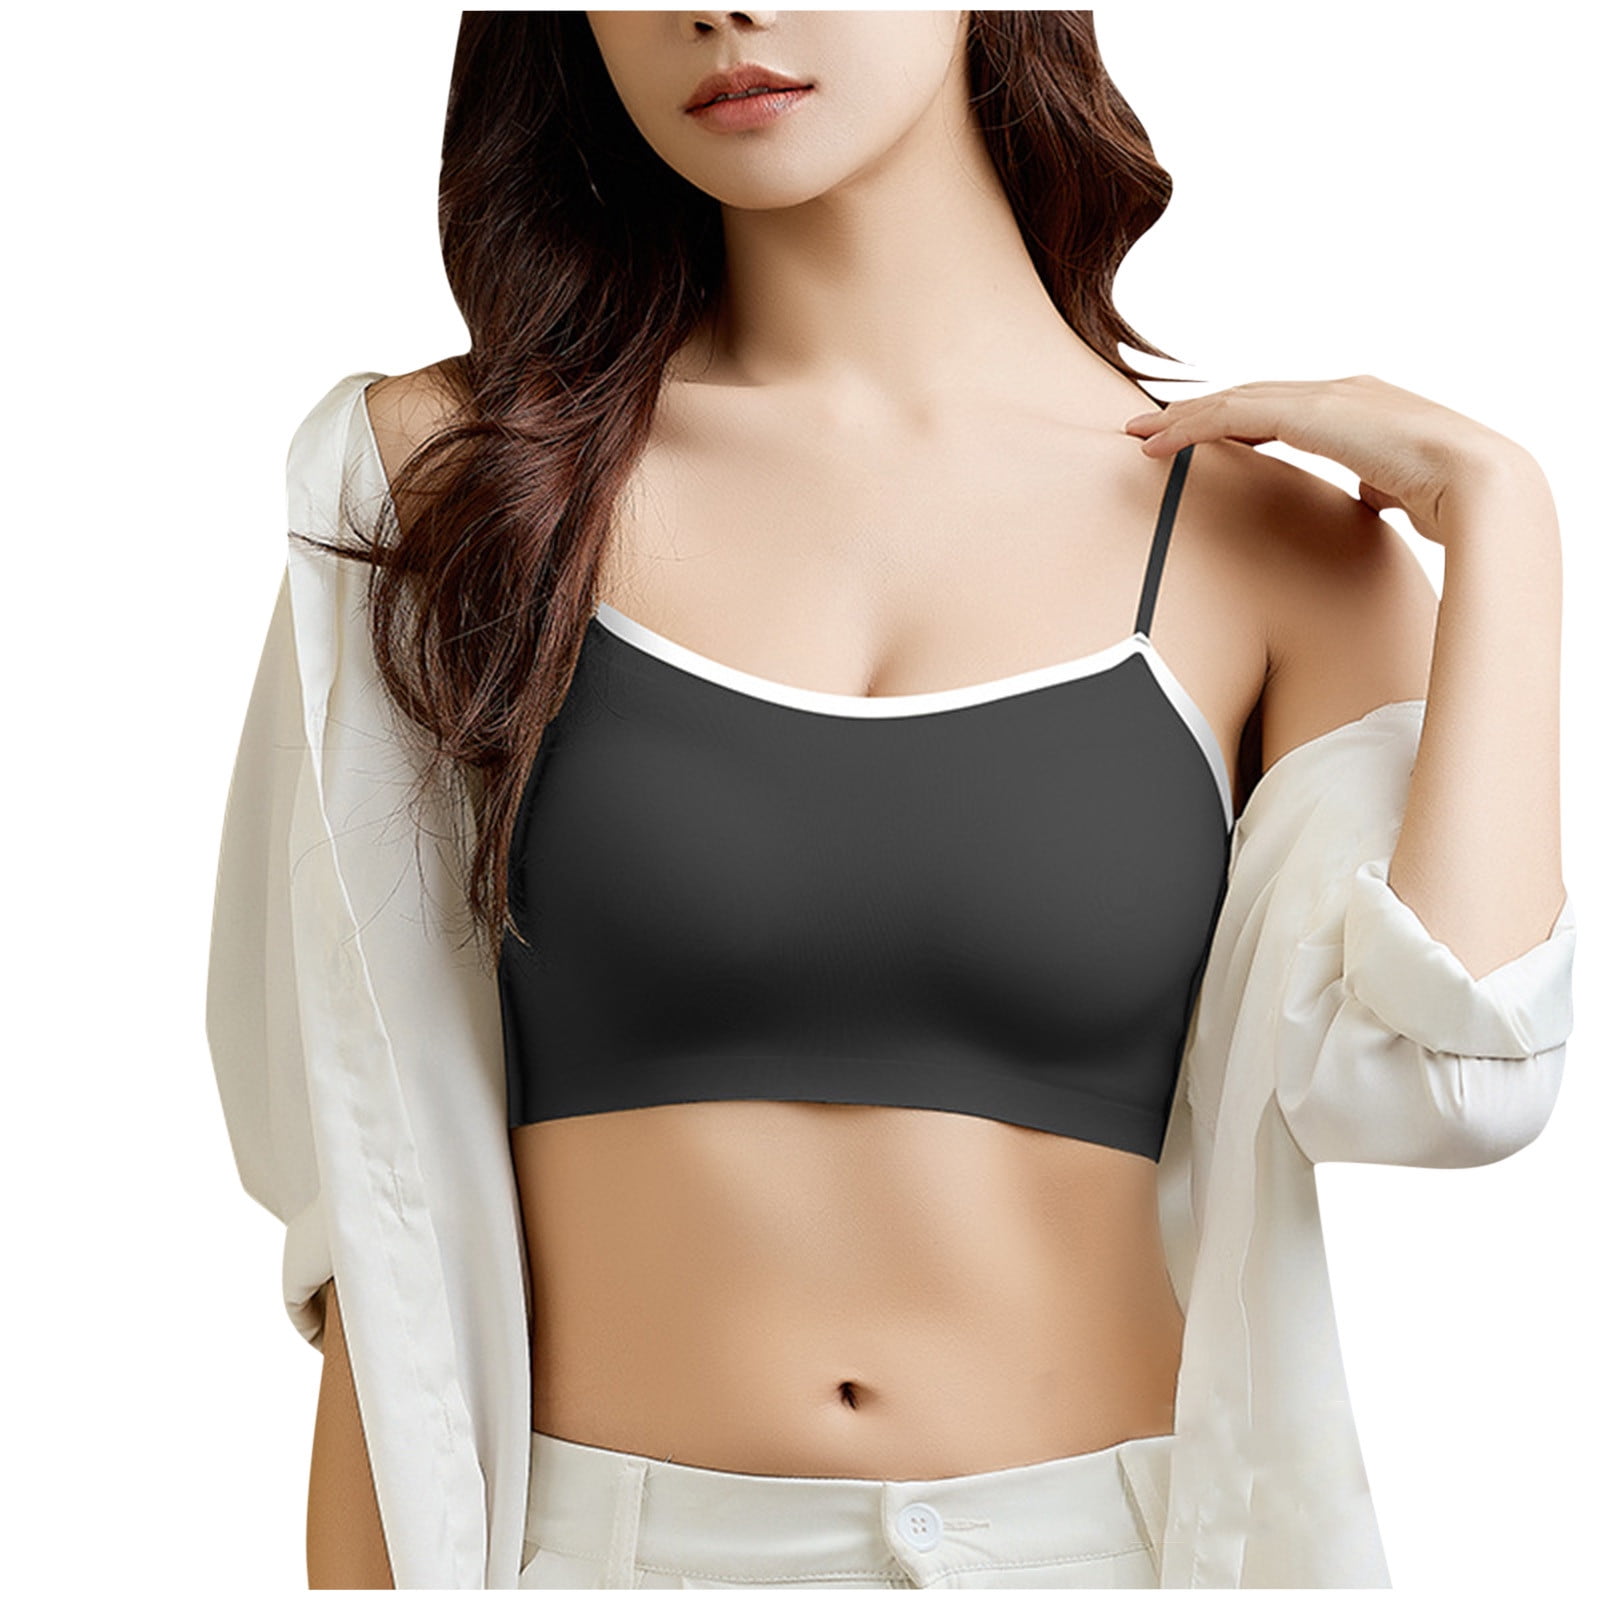  Sports Bras for Women,Wireless Bras for Large Breasted